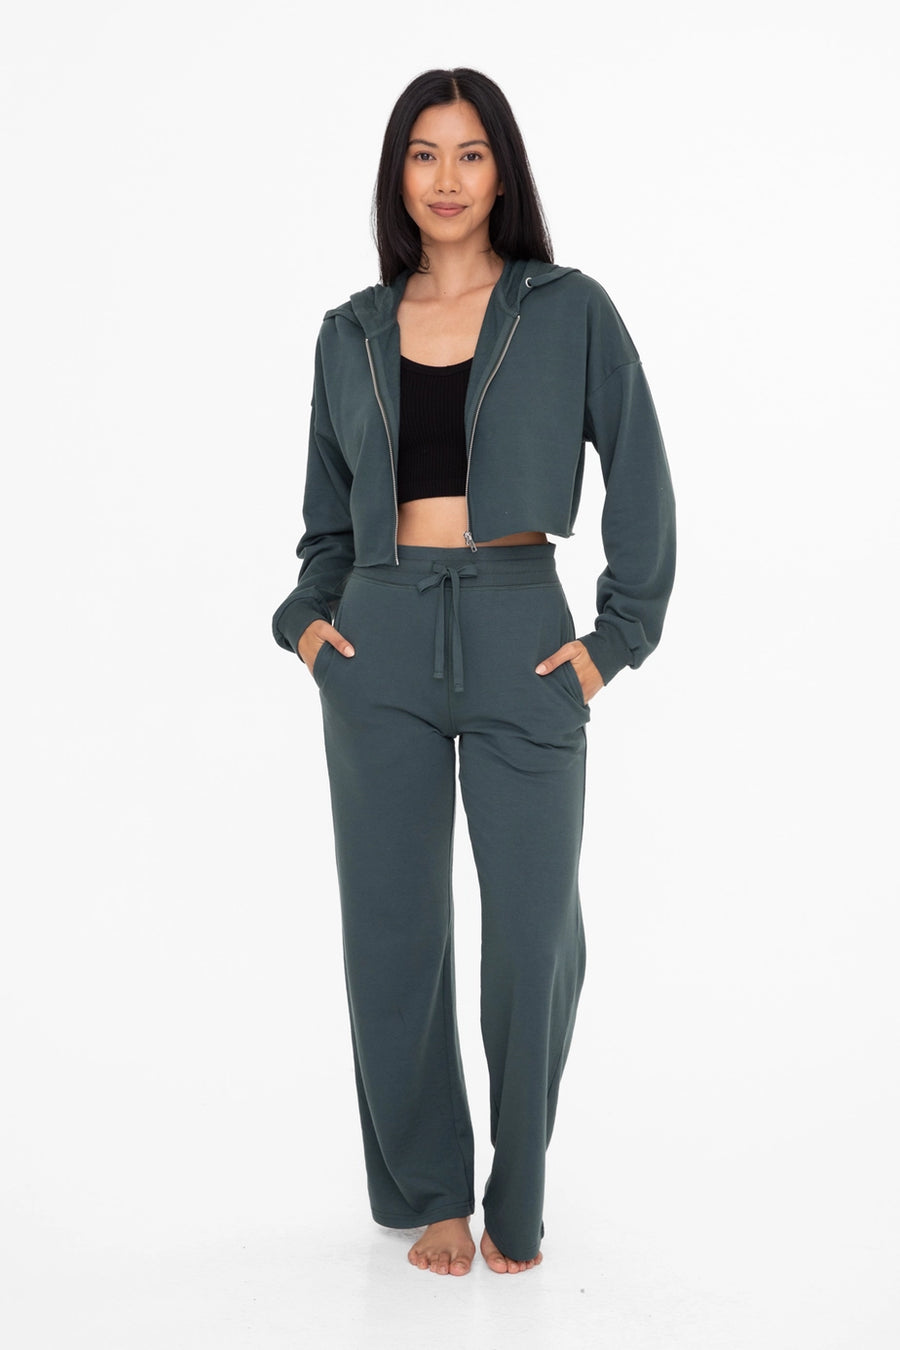 ASHLEIGH FRENCH TERRY WOMEN'S SWEATPANTS | JUNGLE GREEN